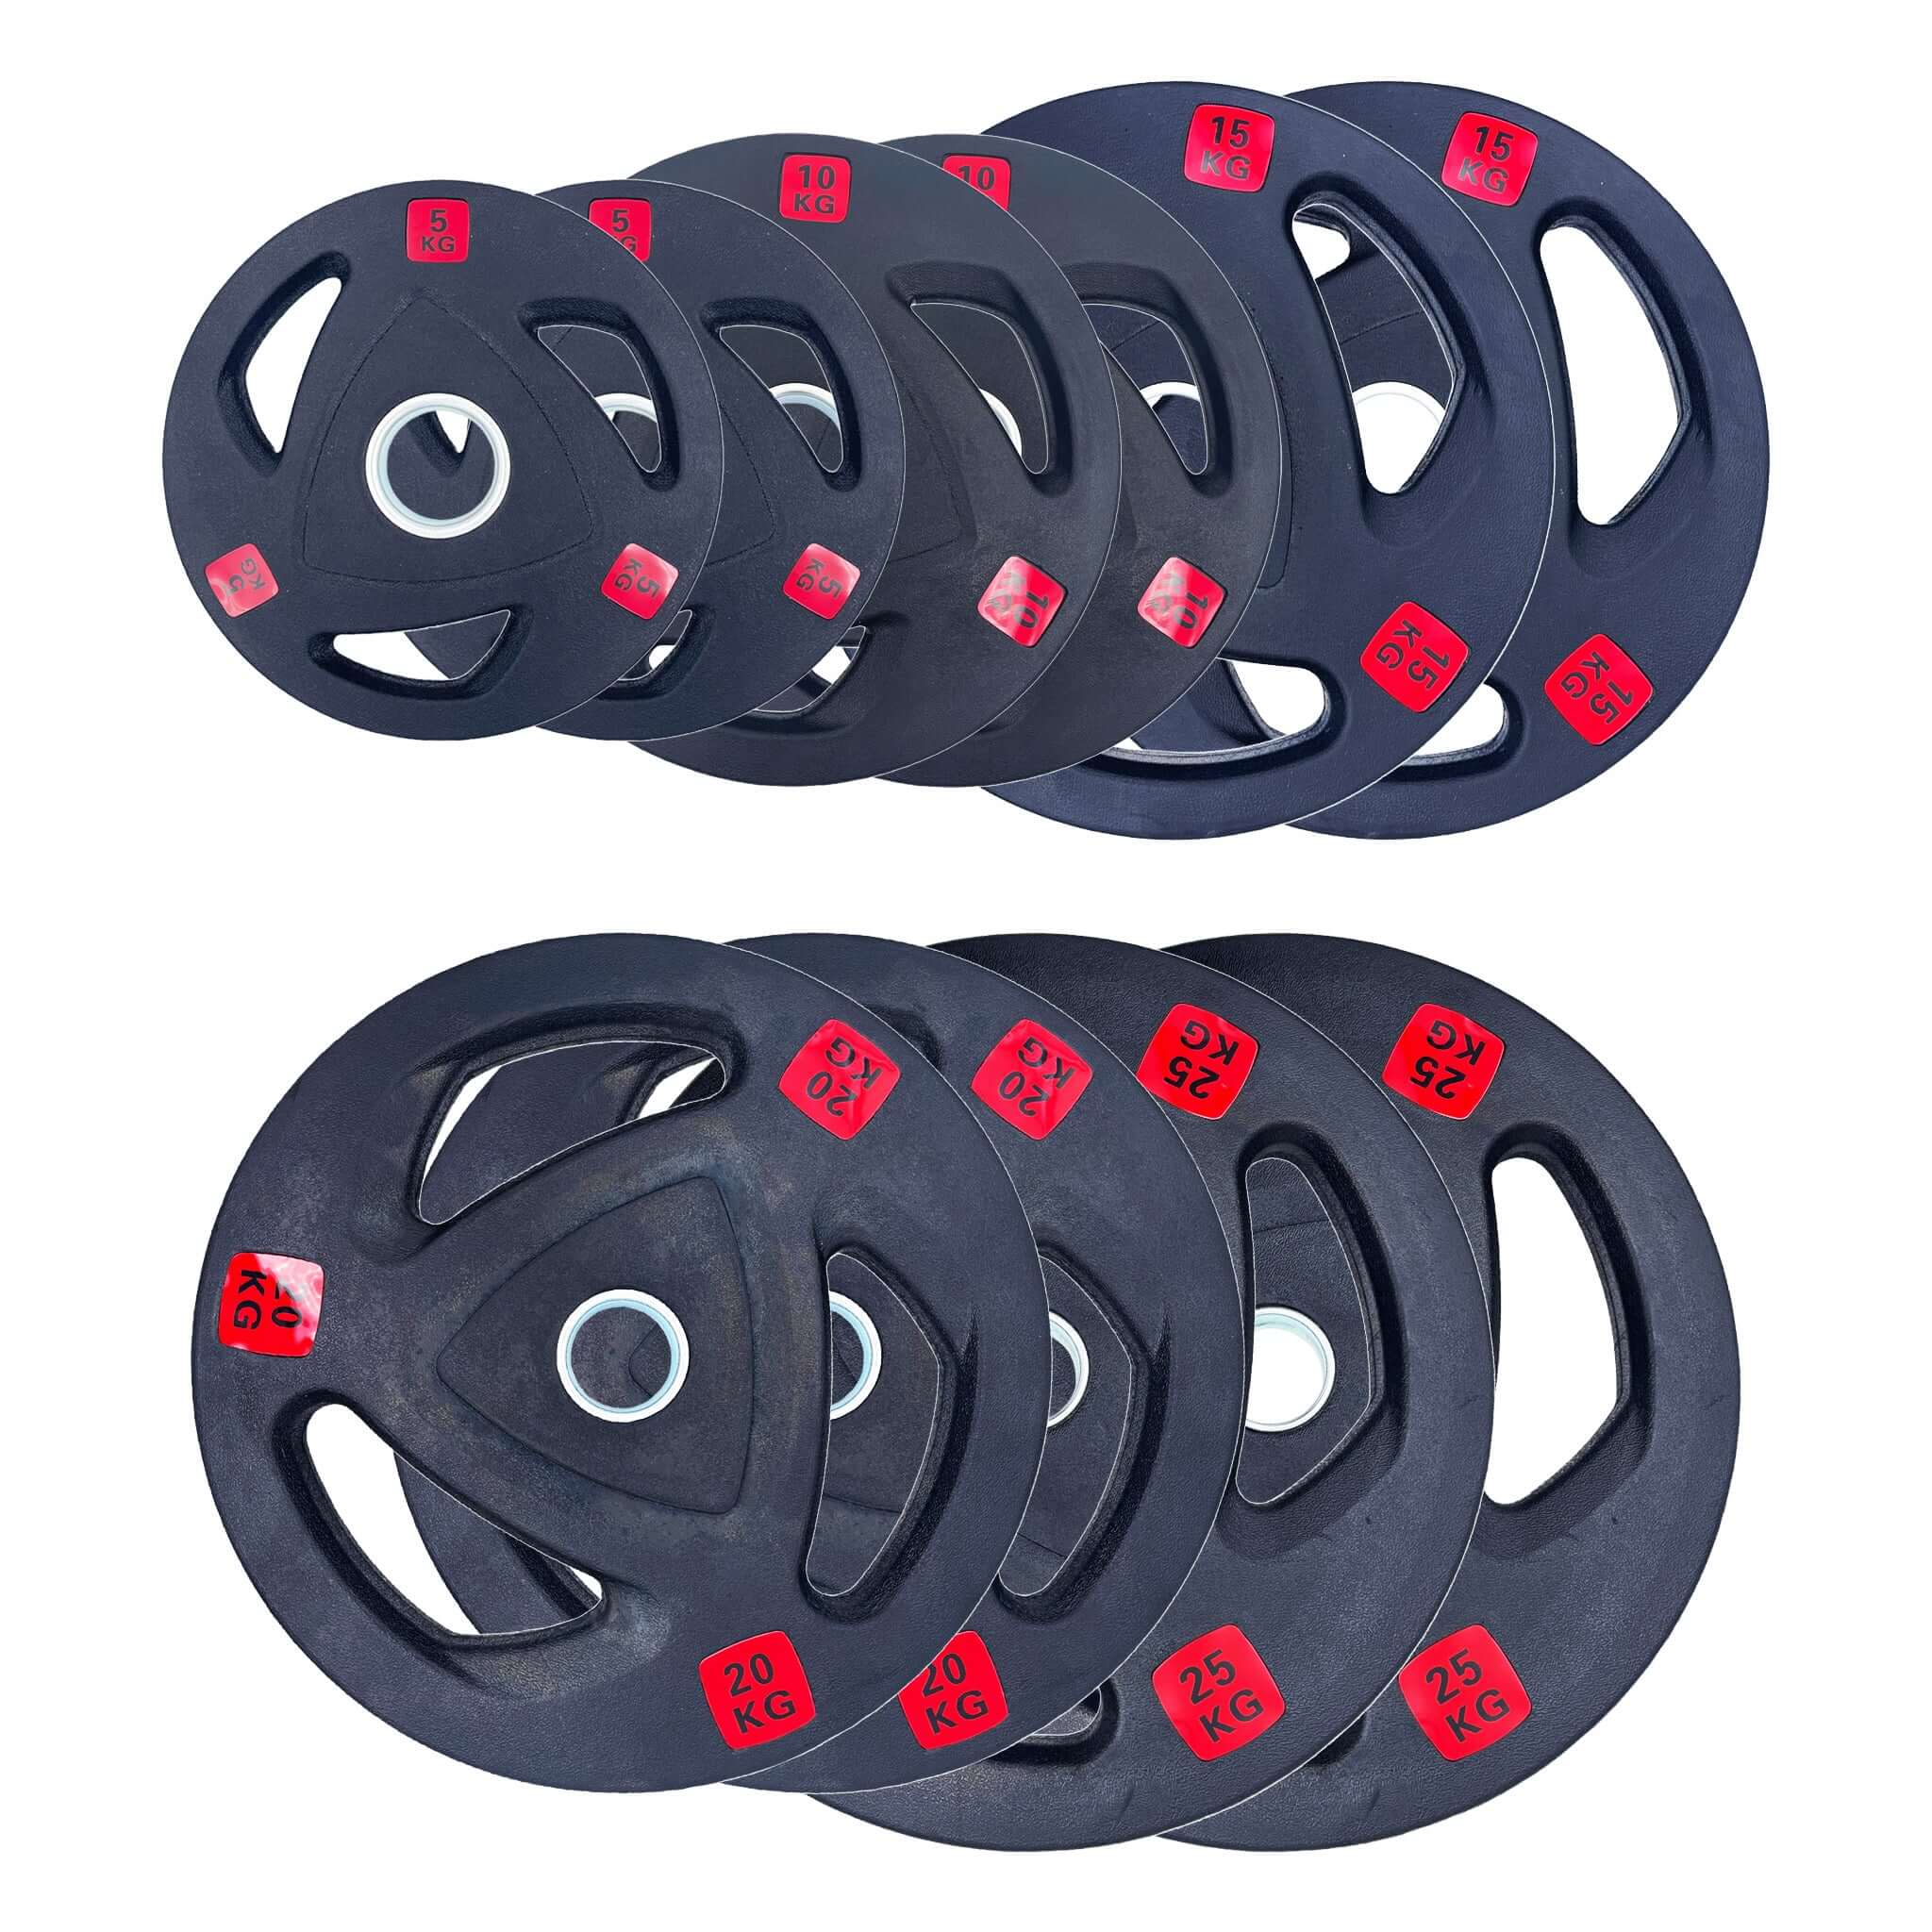 Rubber Coated Type-A Tri-Grip Weight Plates 150kg Bundle | Tri Grip Rubber Plates | INSOURCE